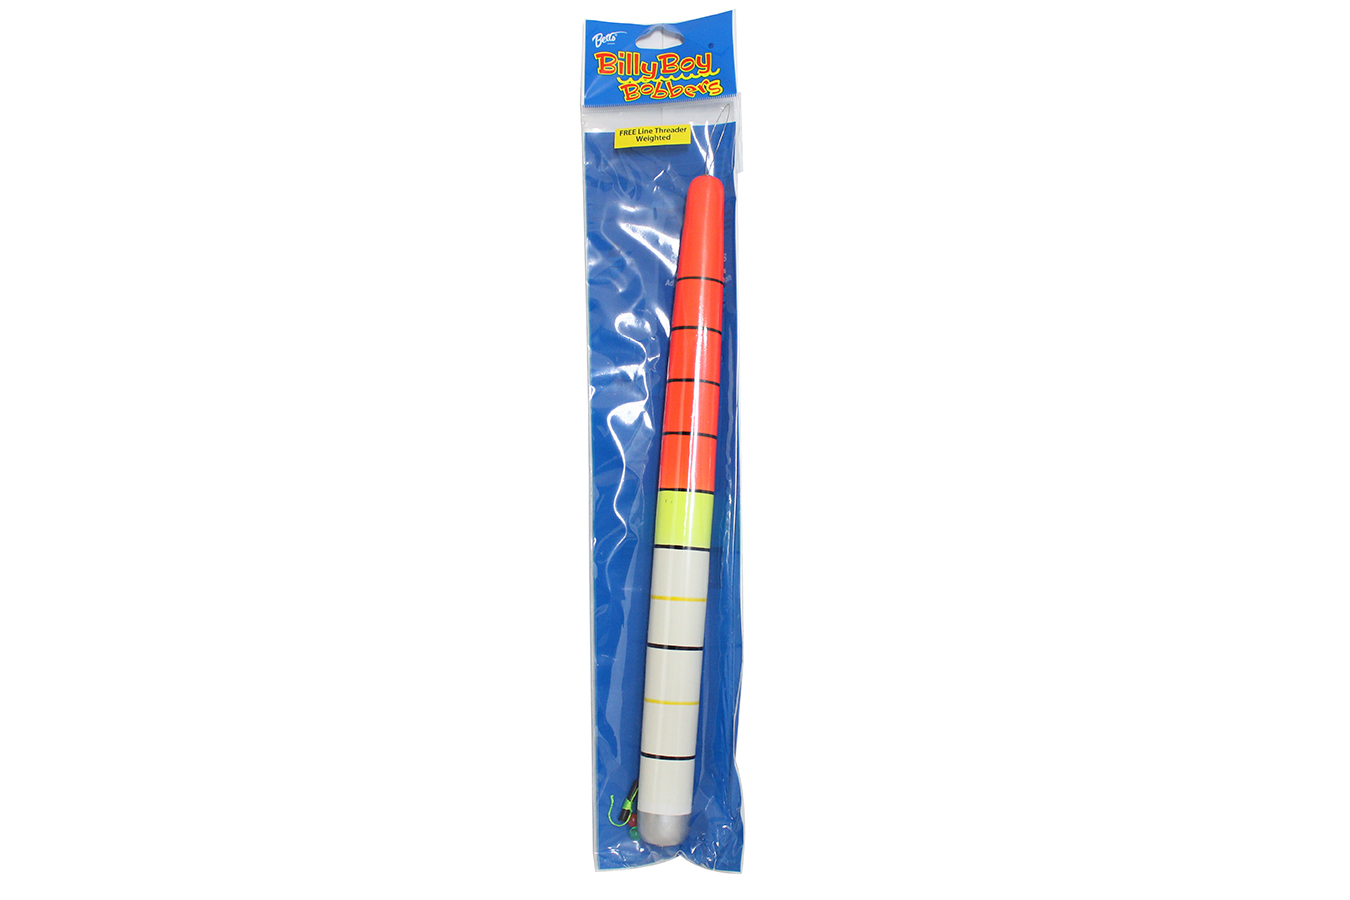 Discount Betts Pole Floats Weighted 1x12 for Sale